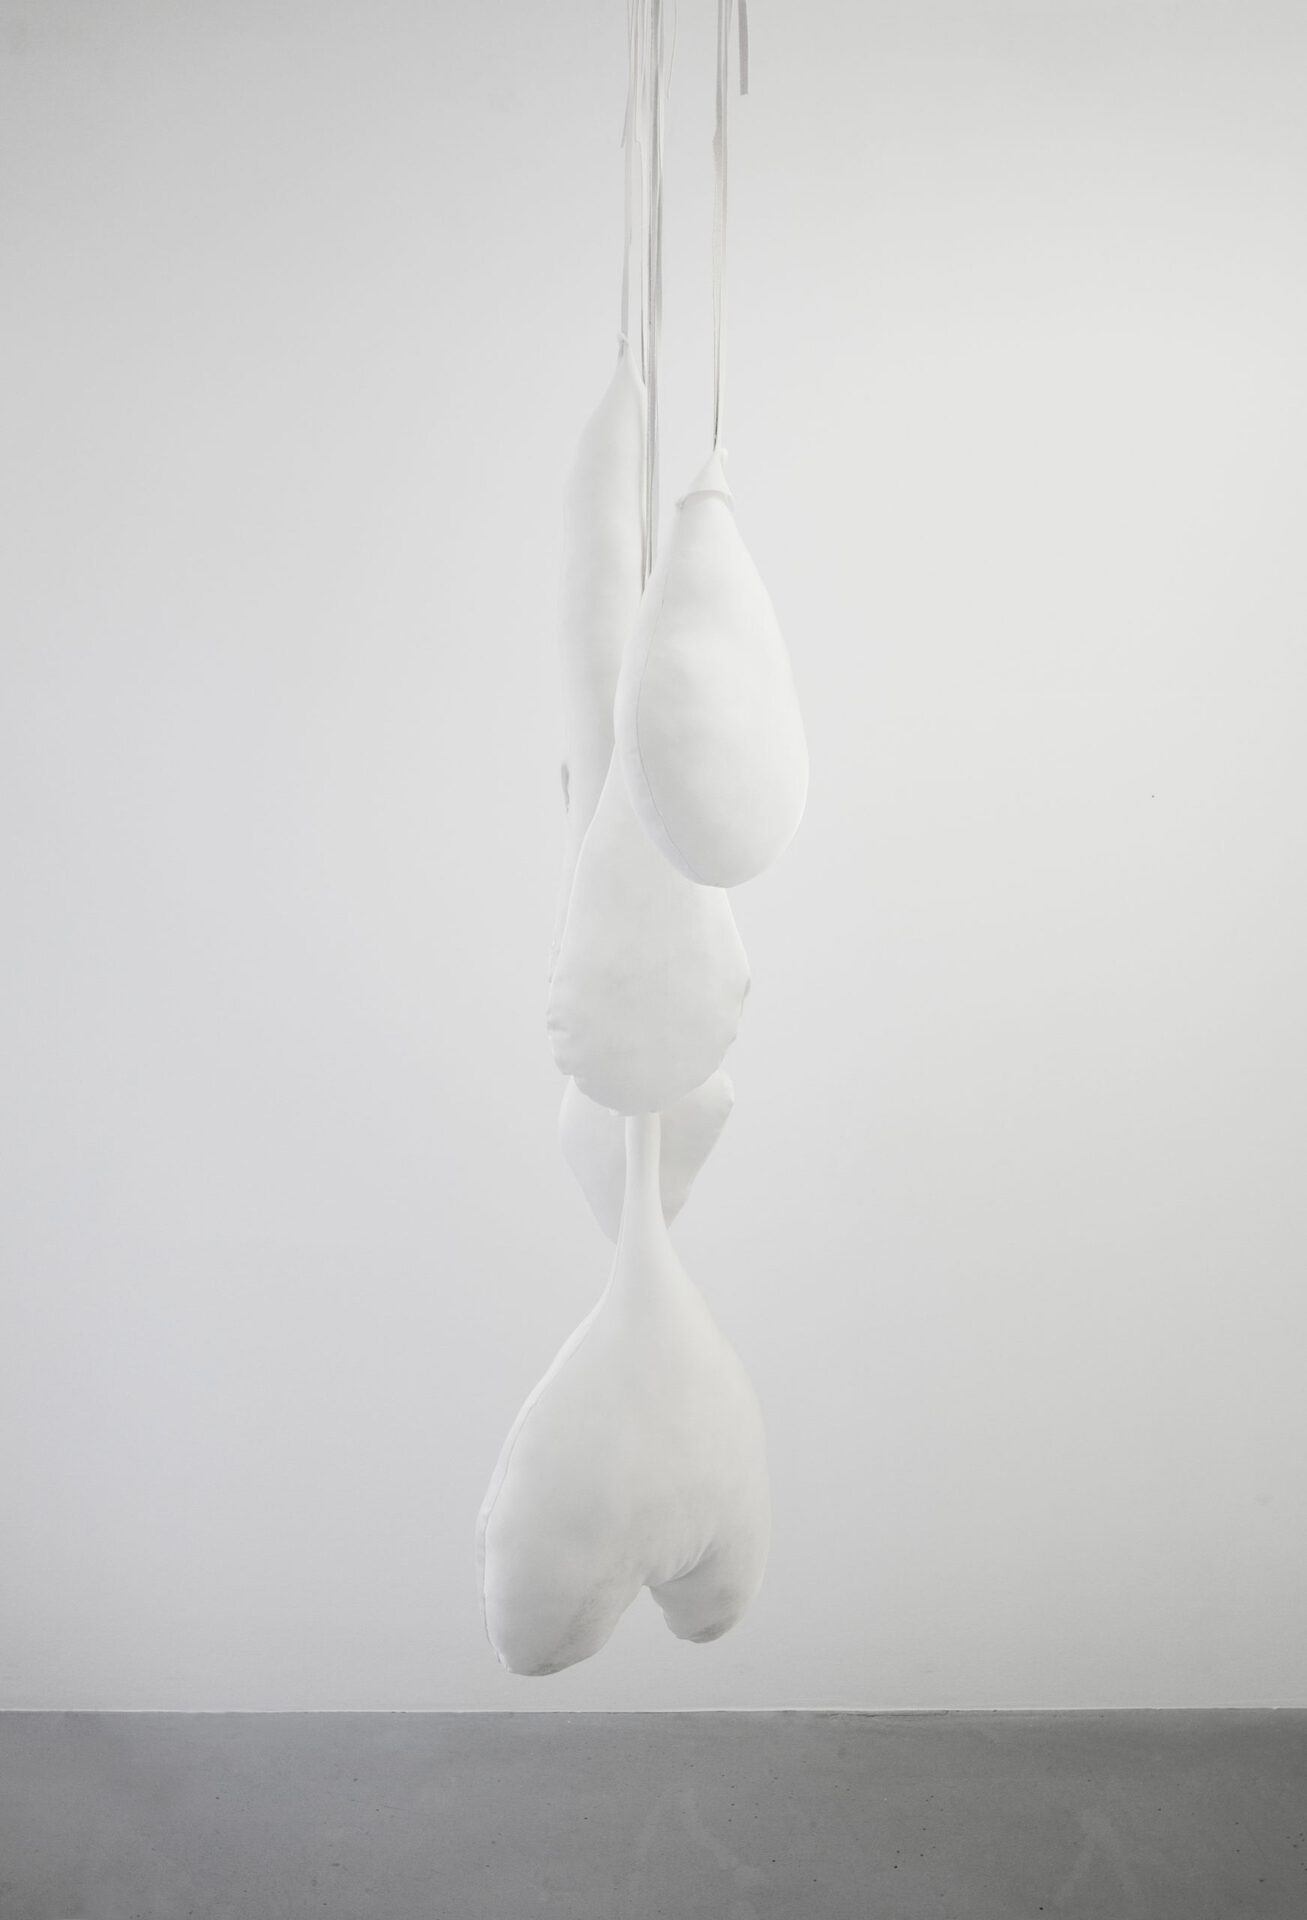 Franca Scholz, Tits and more tears, padded cotton, installation, 2021